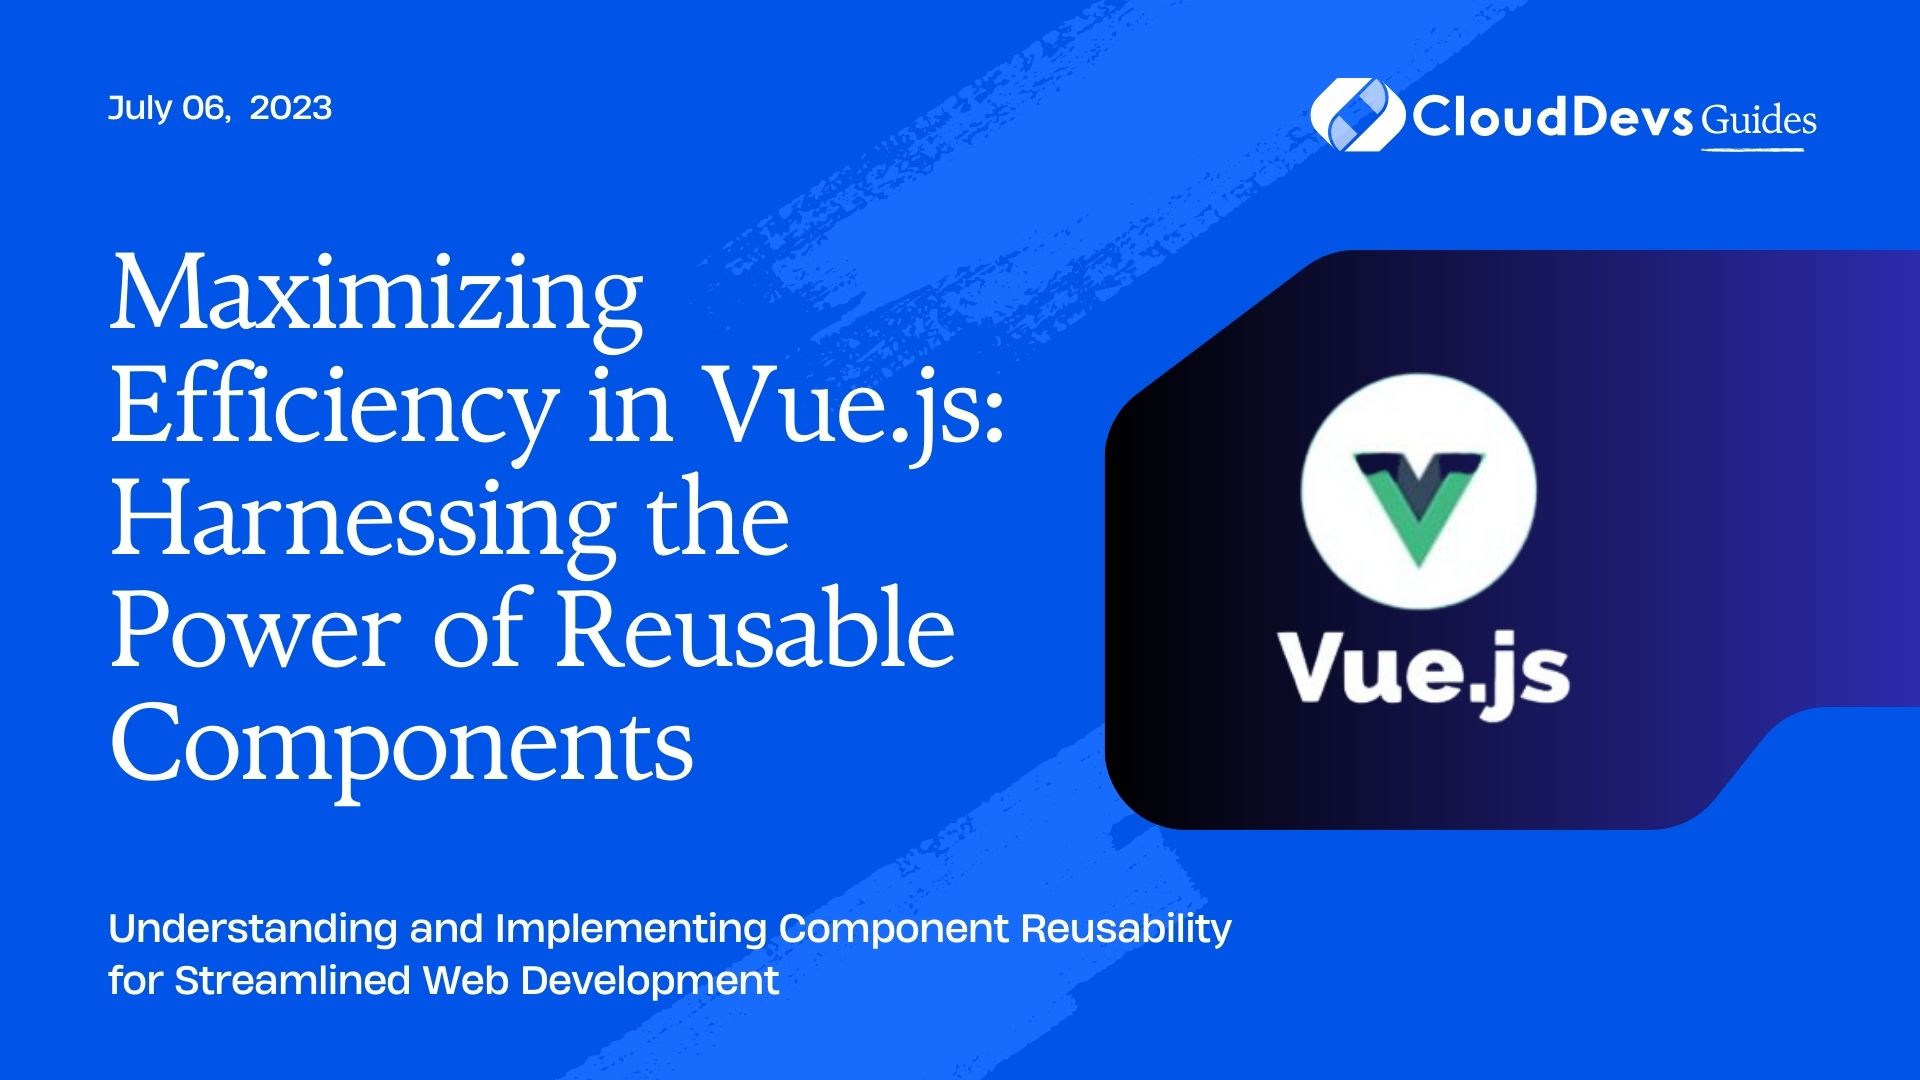 Maximizing Efficiency in Vue.js: Harnessing the Power of Reusable Components